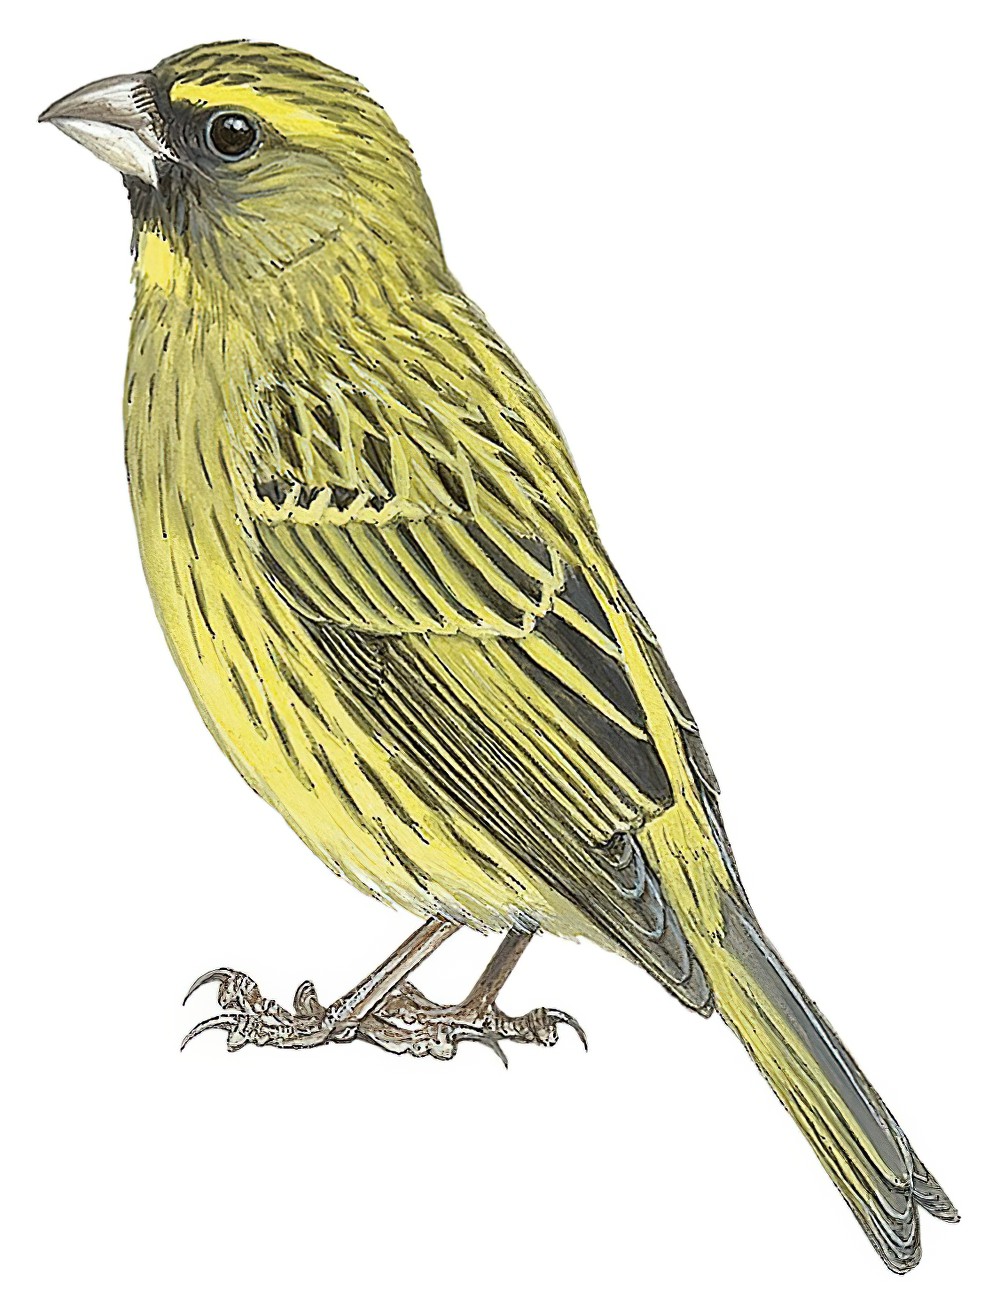 Forest Canary / Crithagra scotops